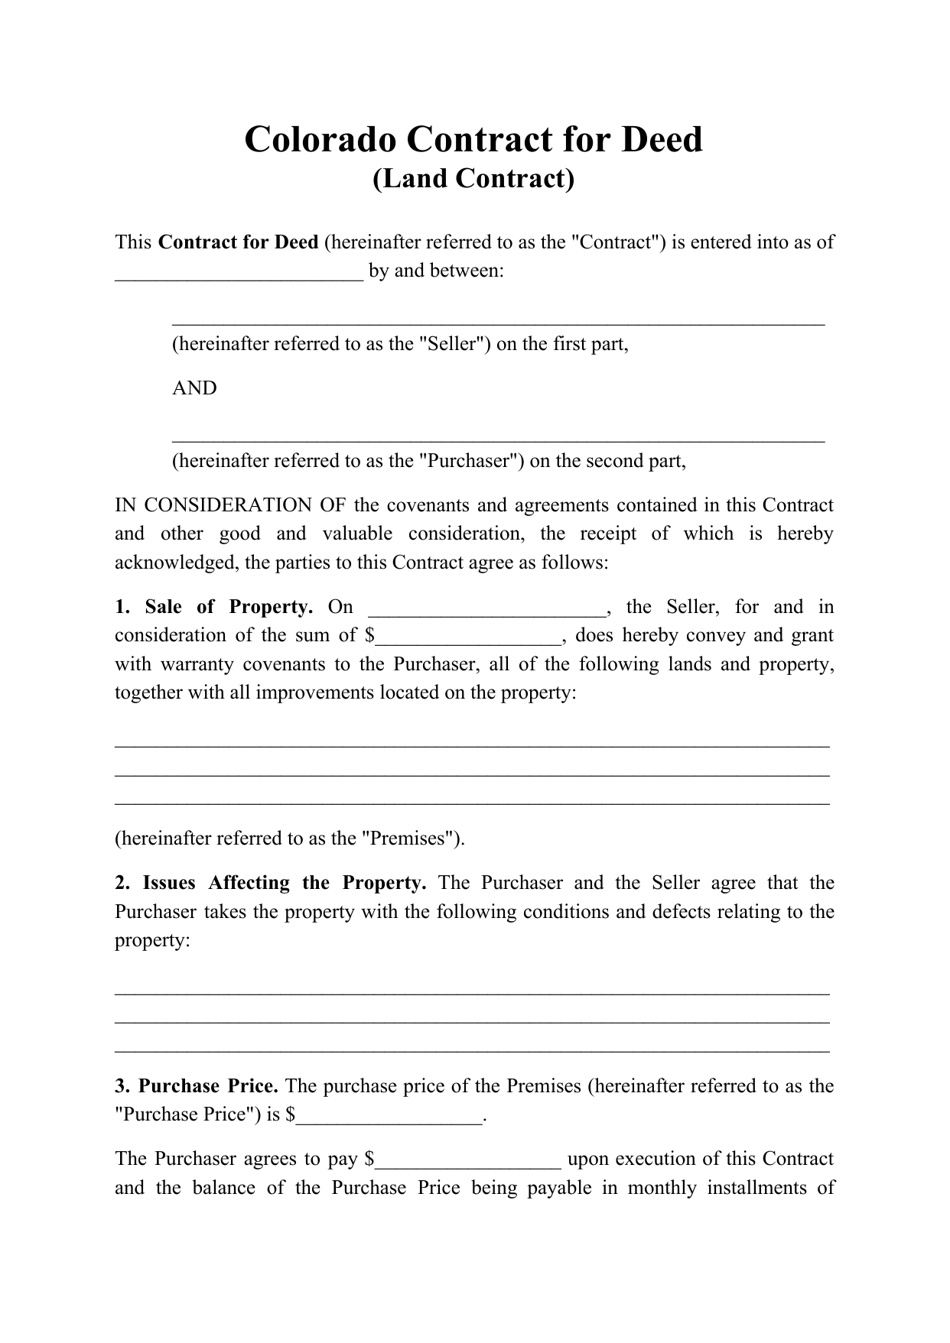 Contract for Deed (Land Contract) - Colorado, Page 1